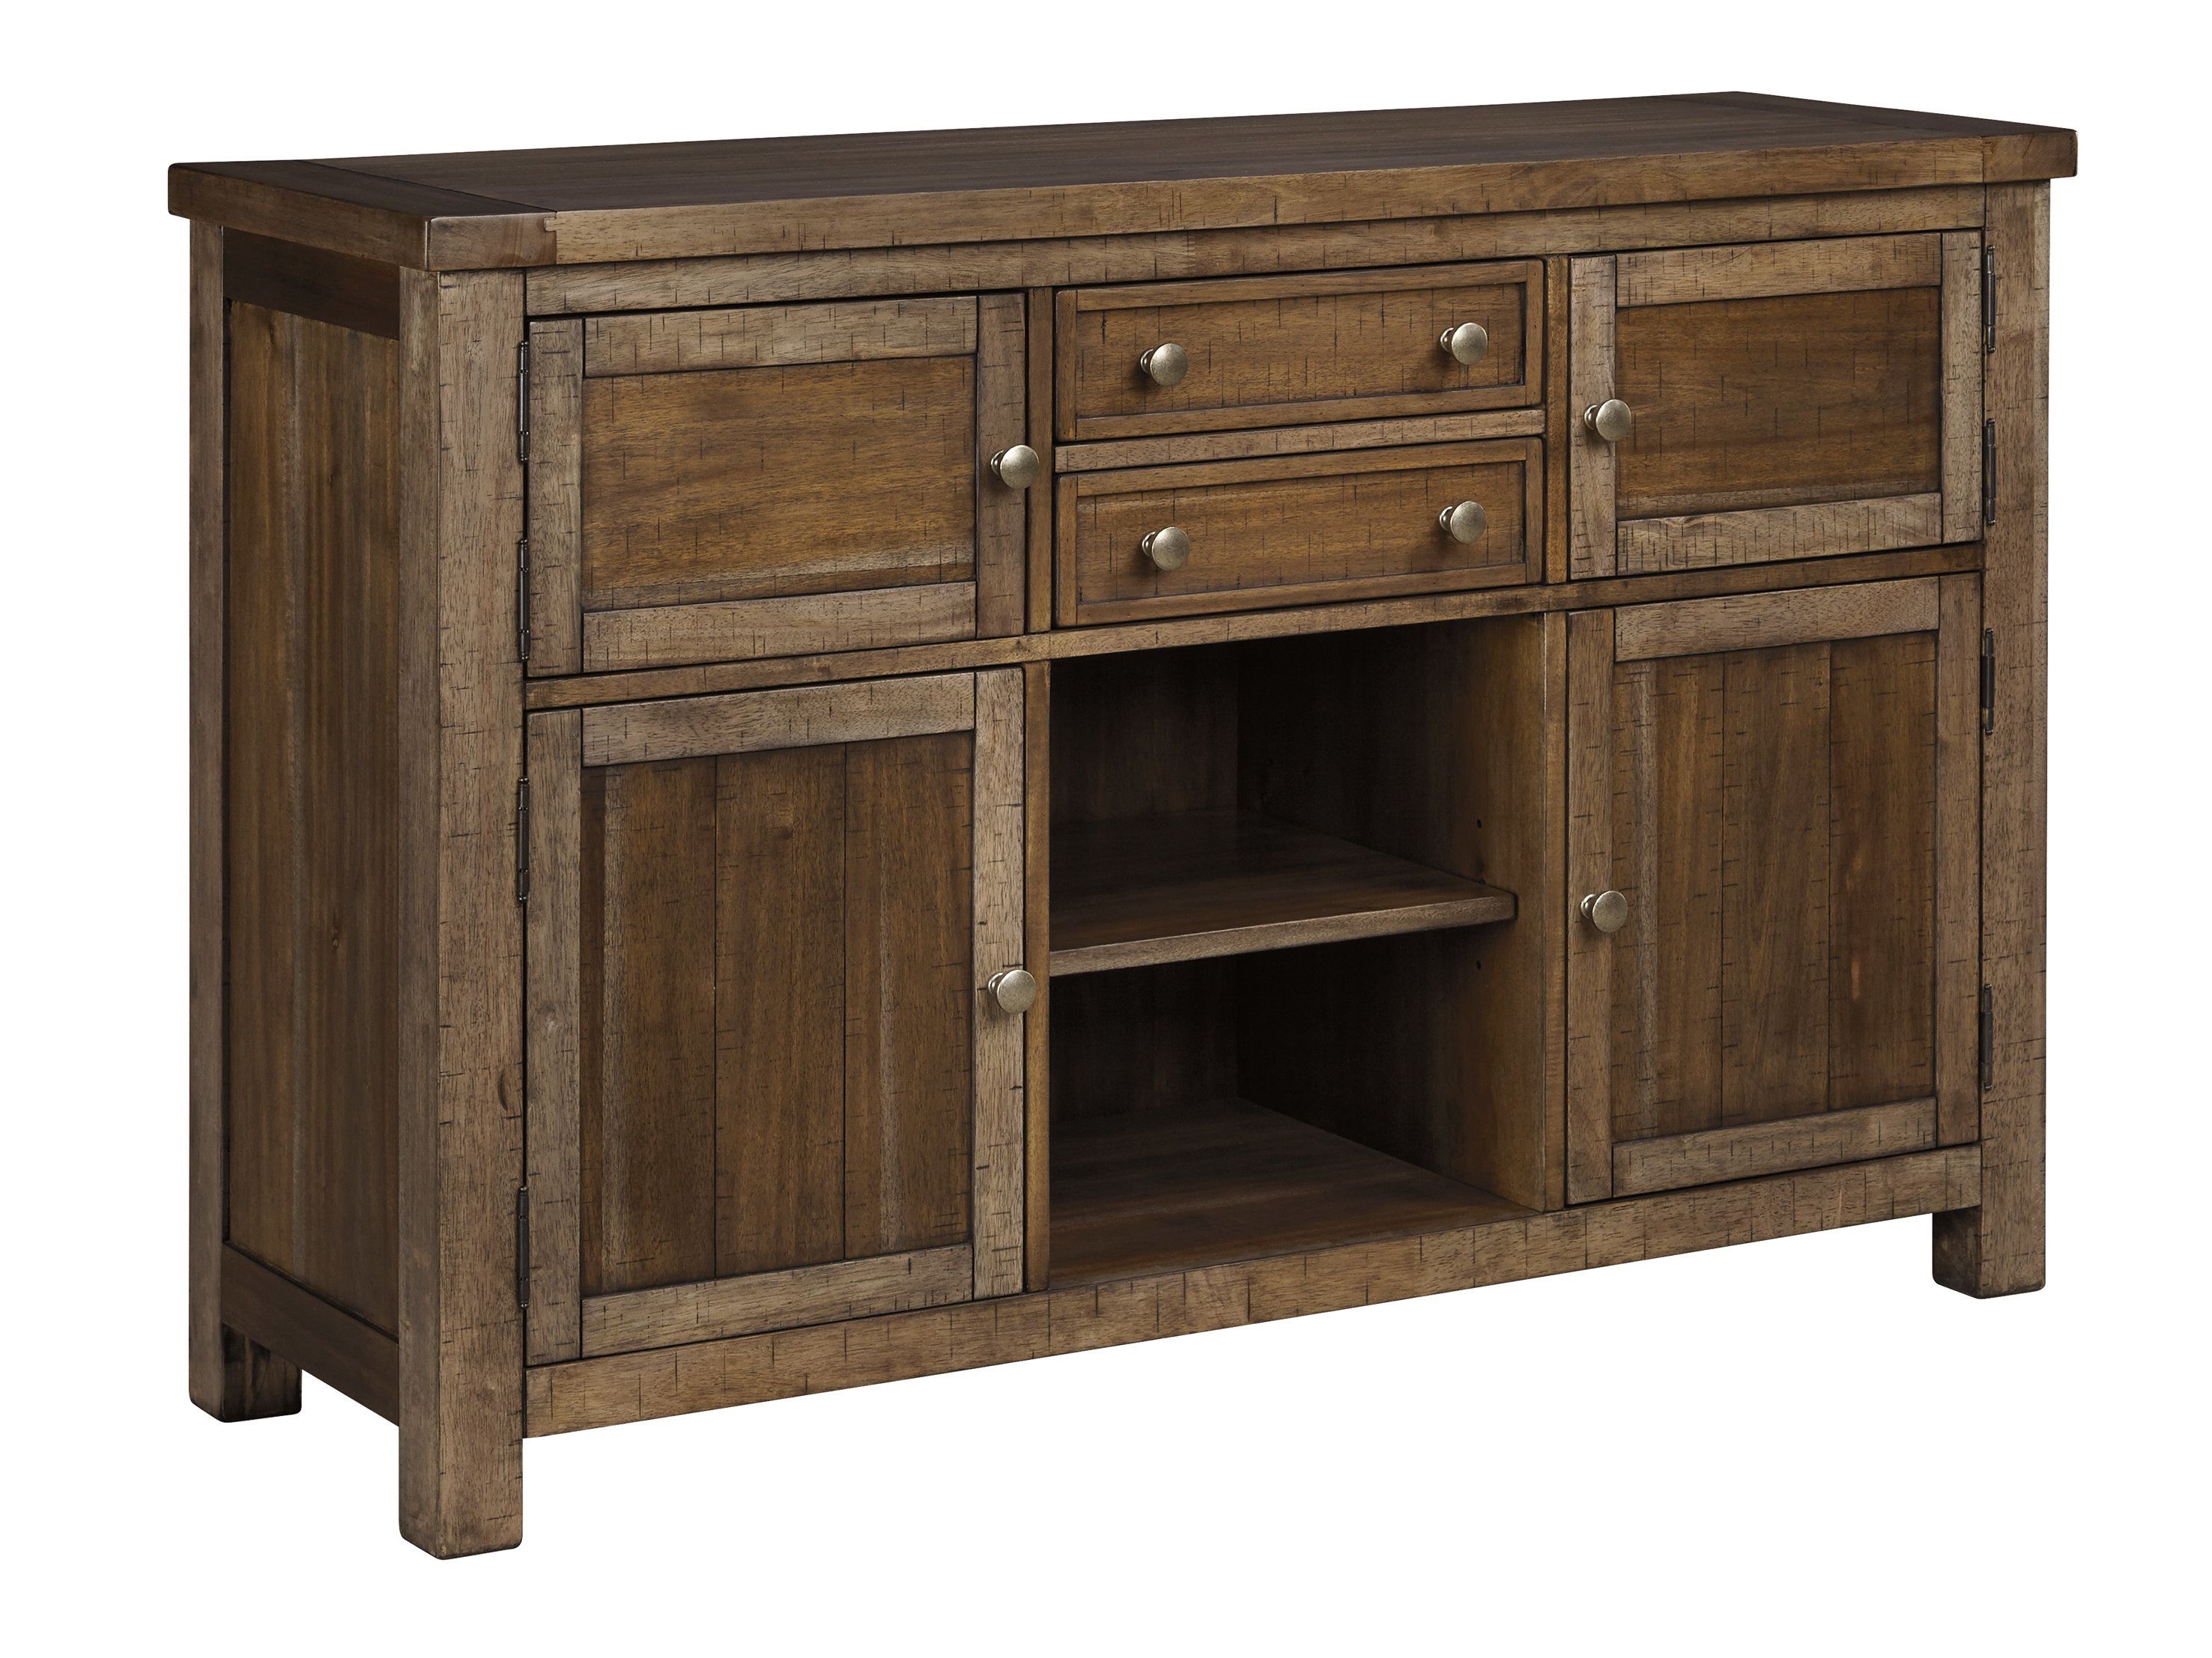 Hillary Dining Room Buffet Table With Regard To Most Recently Released Saint Gratien Sideboards (View 11 of 20)